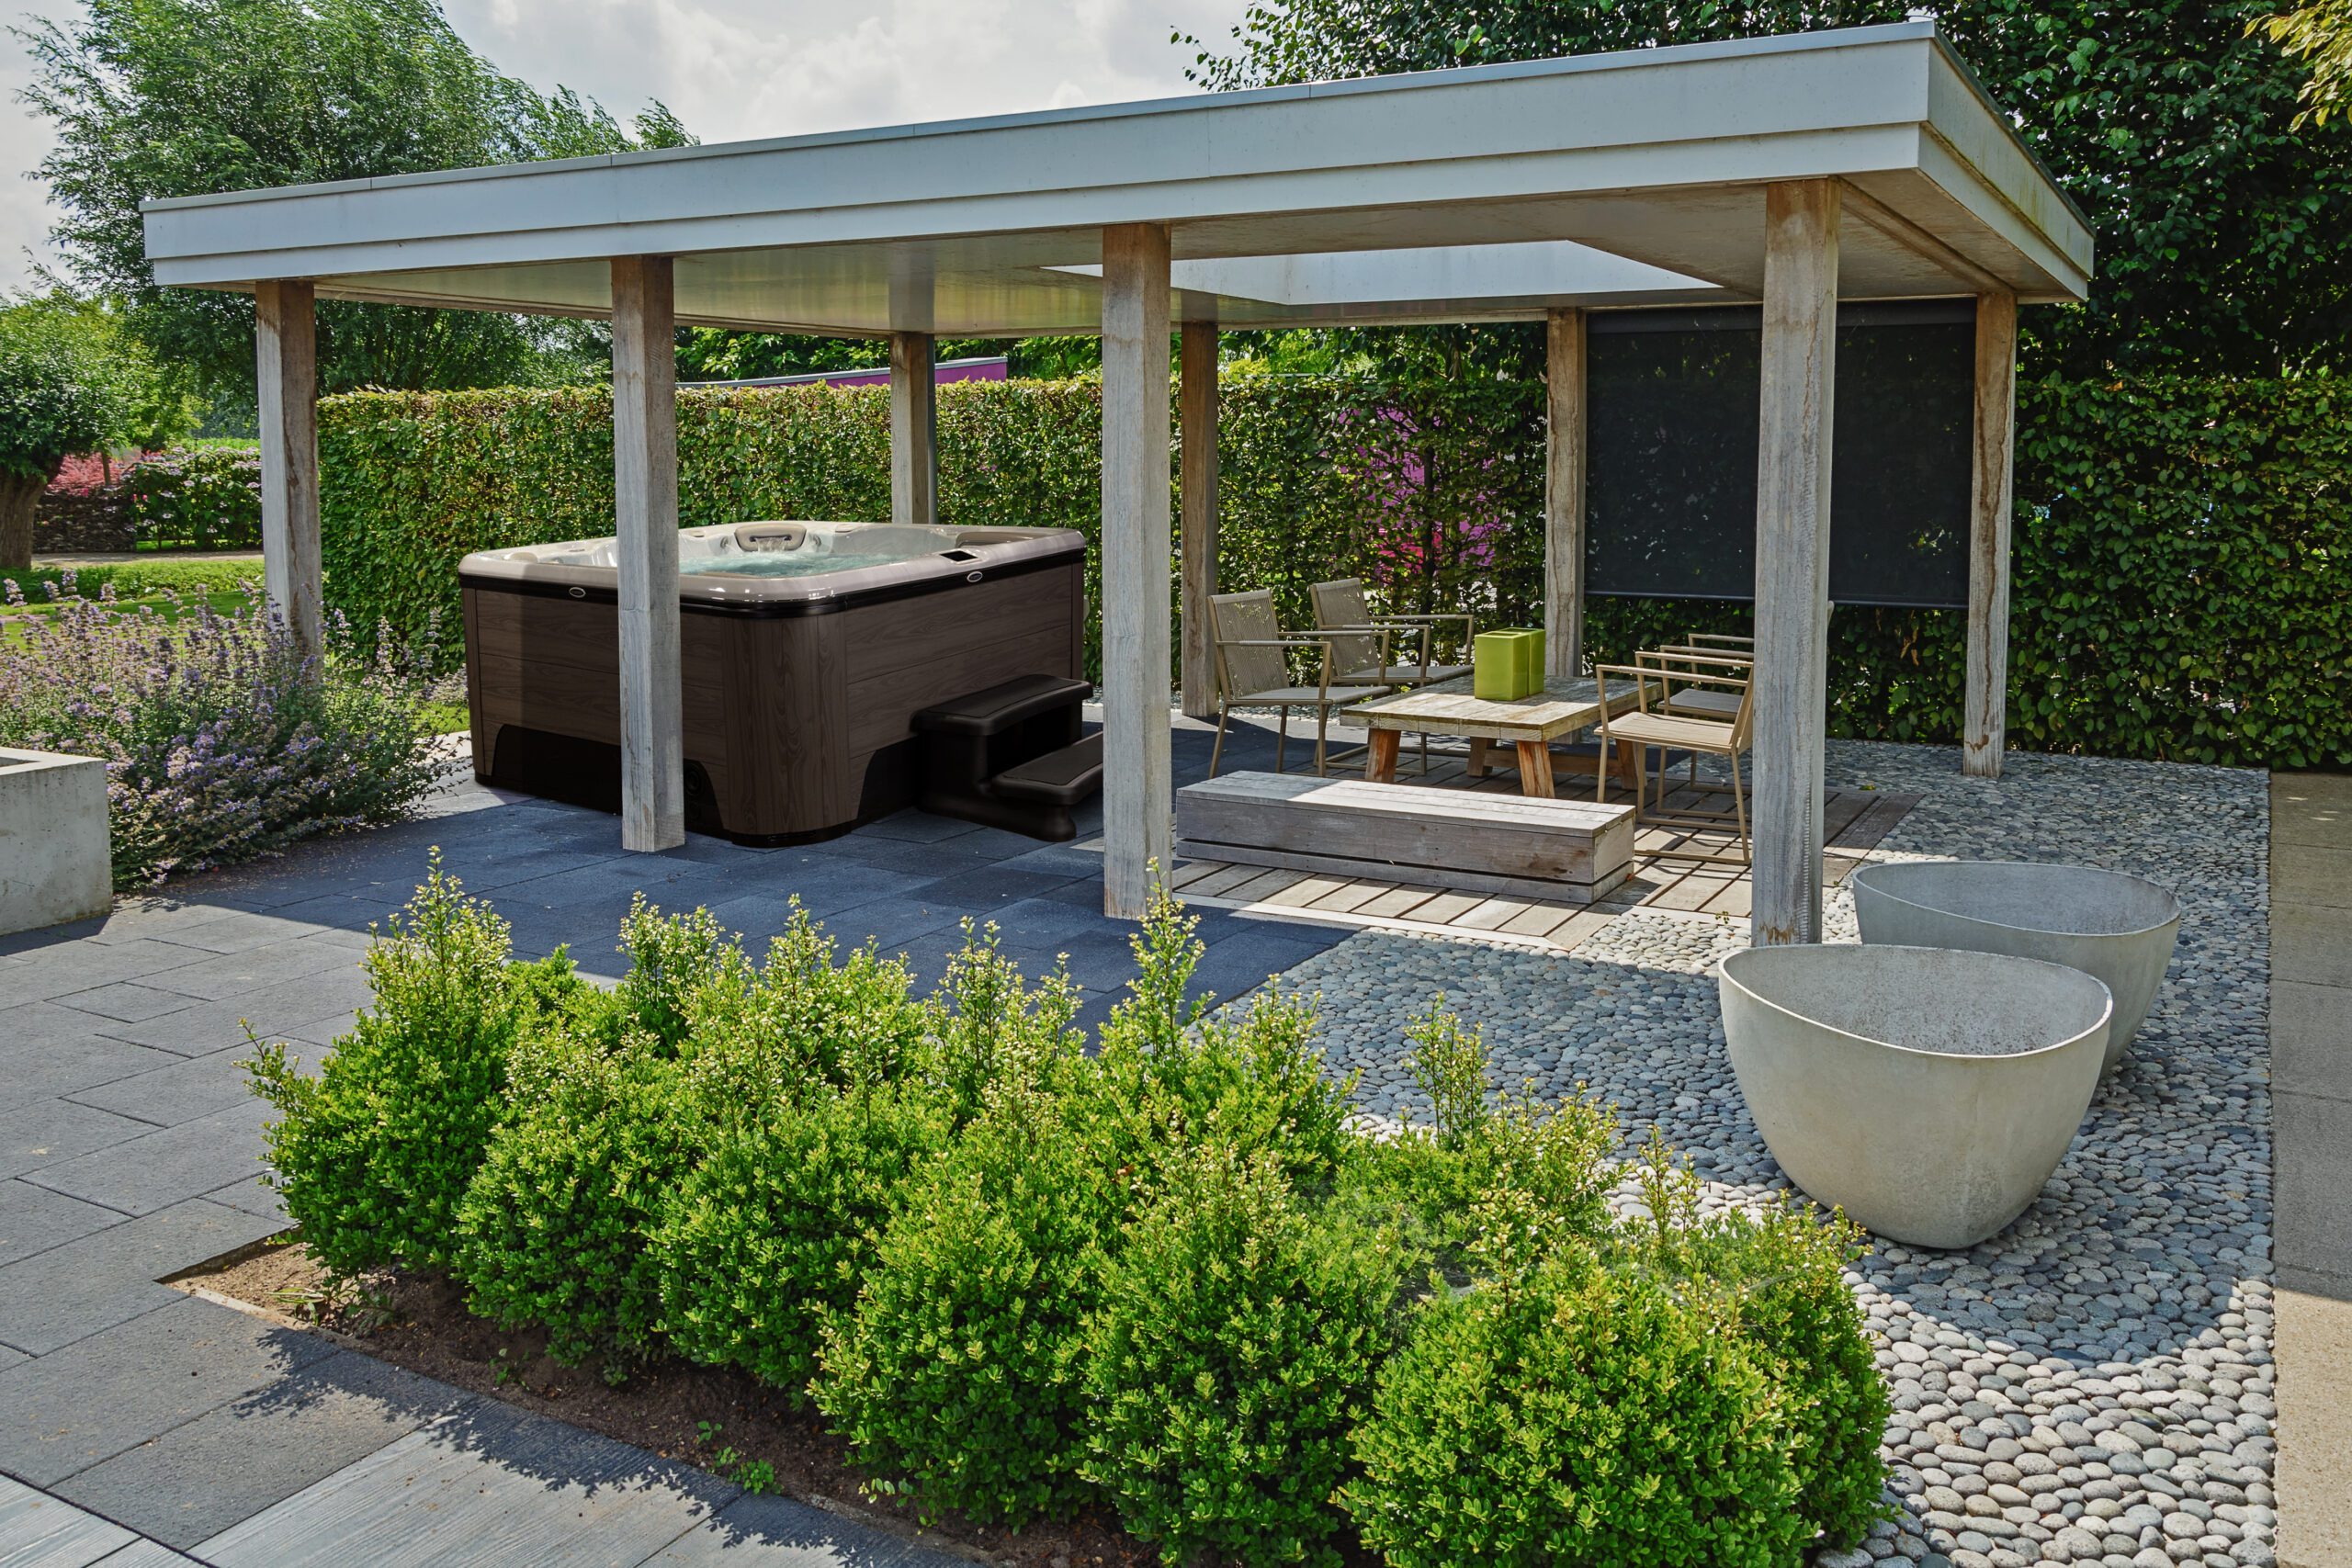 Patio outdoor with hot tub relaxation area. - Lunar Lagoons Ohio